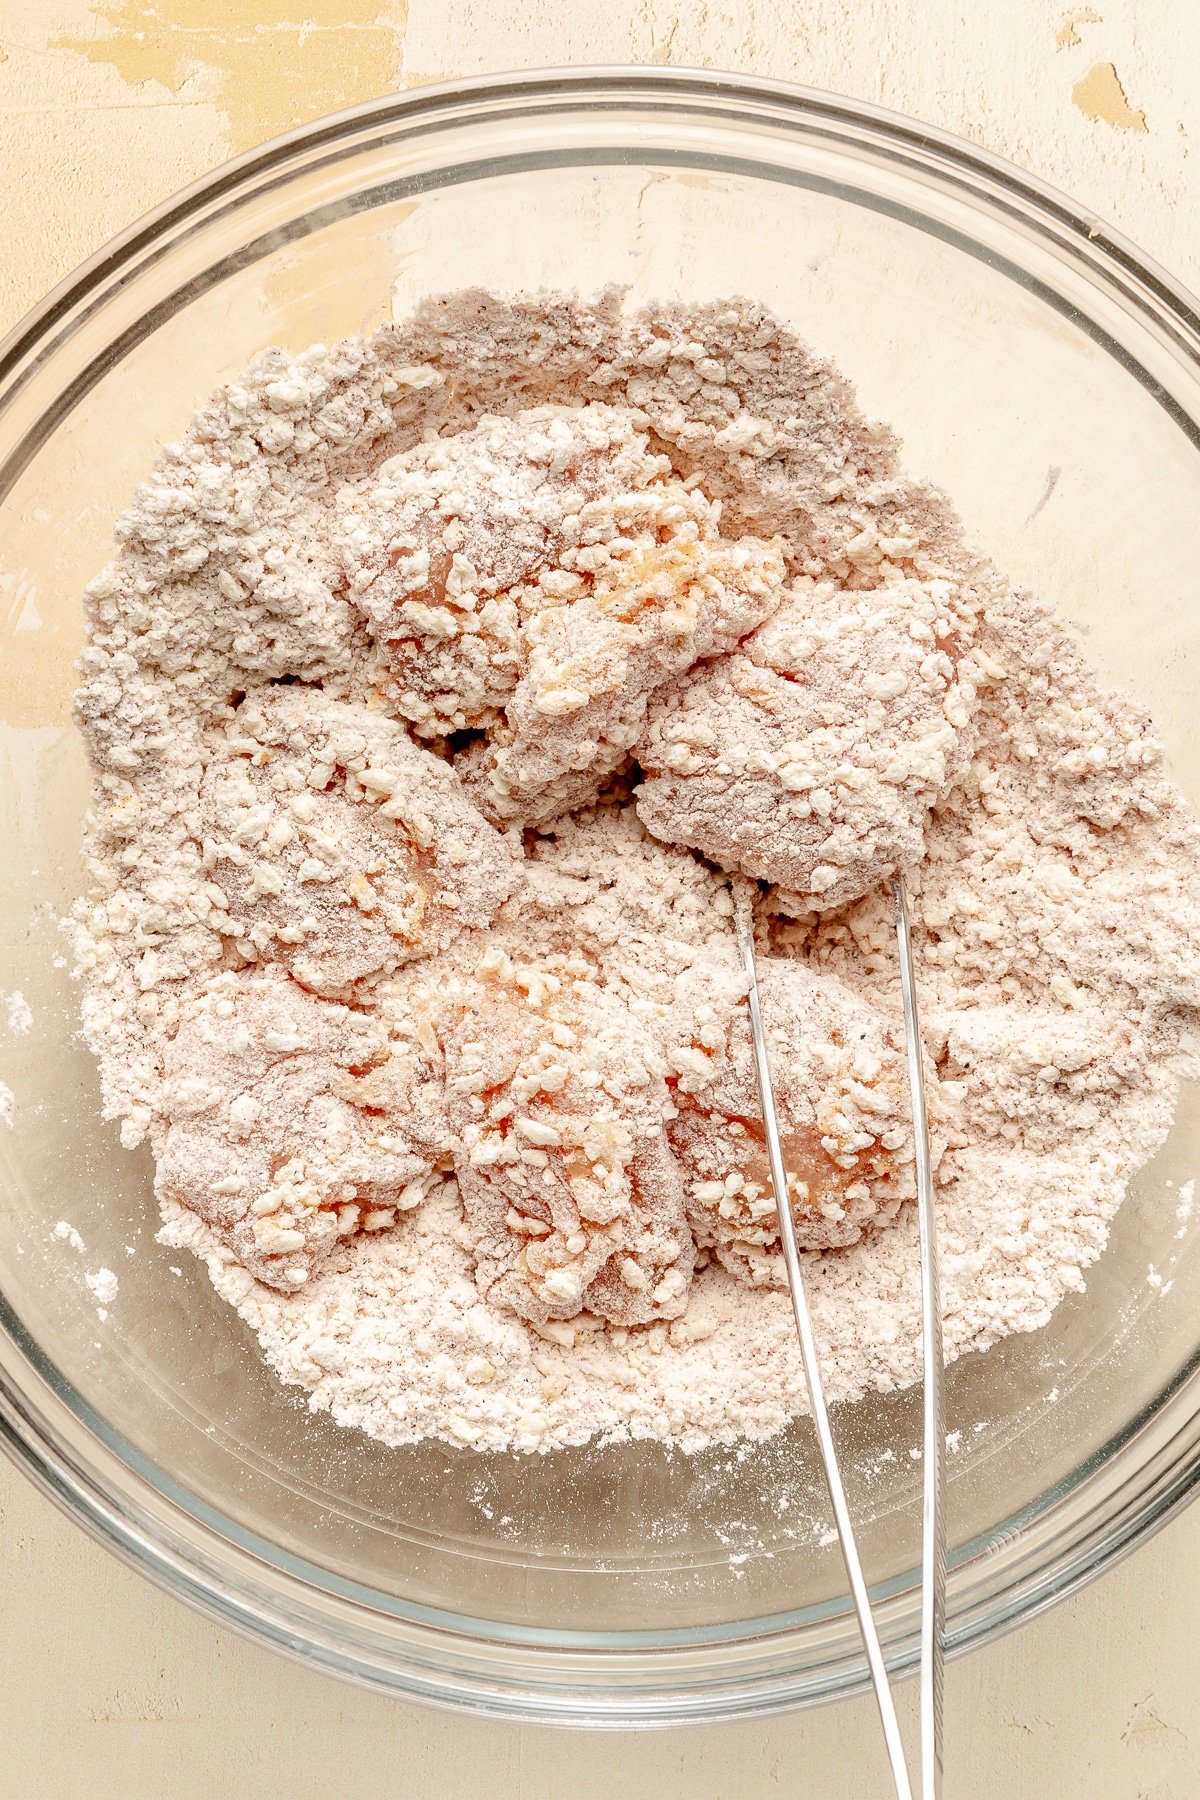 Egg covered chicken pieces are shown being tossed in flour.